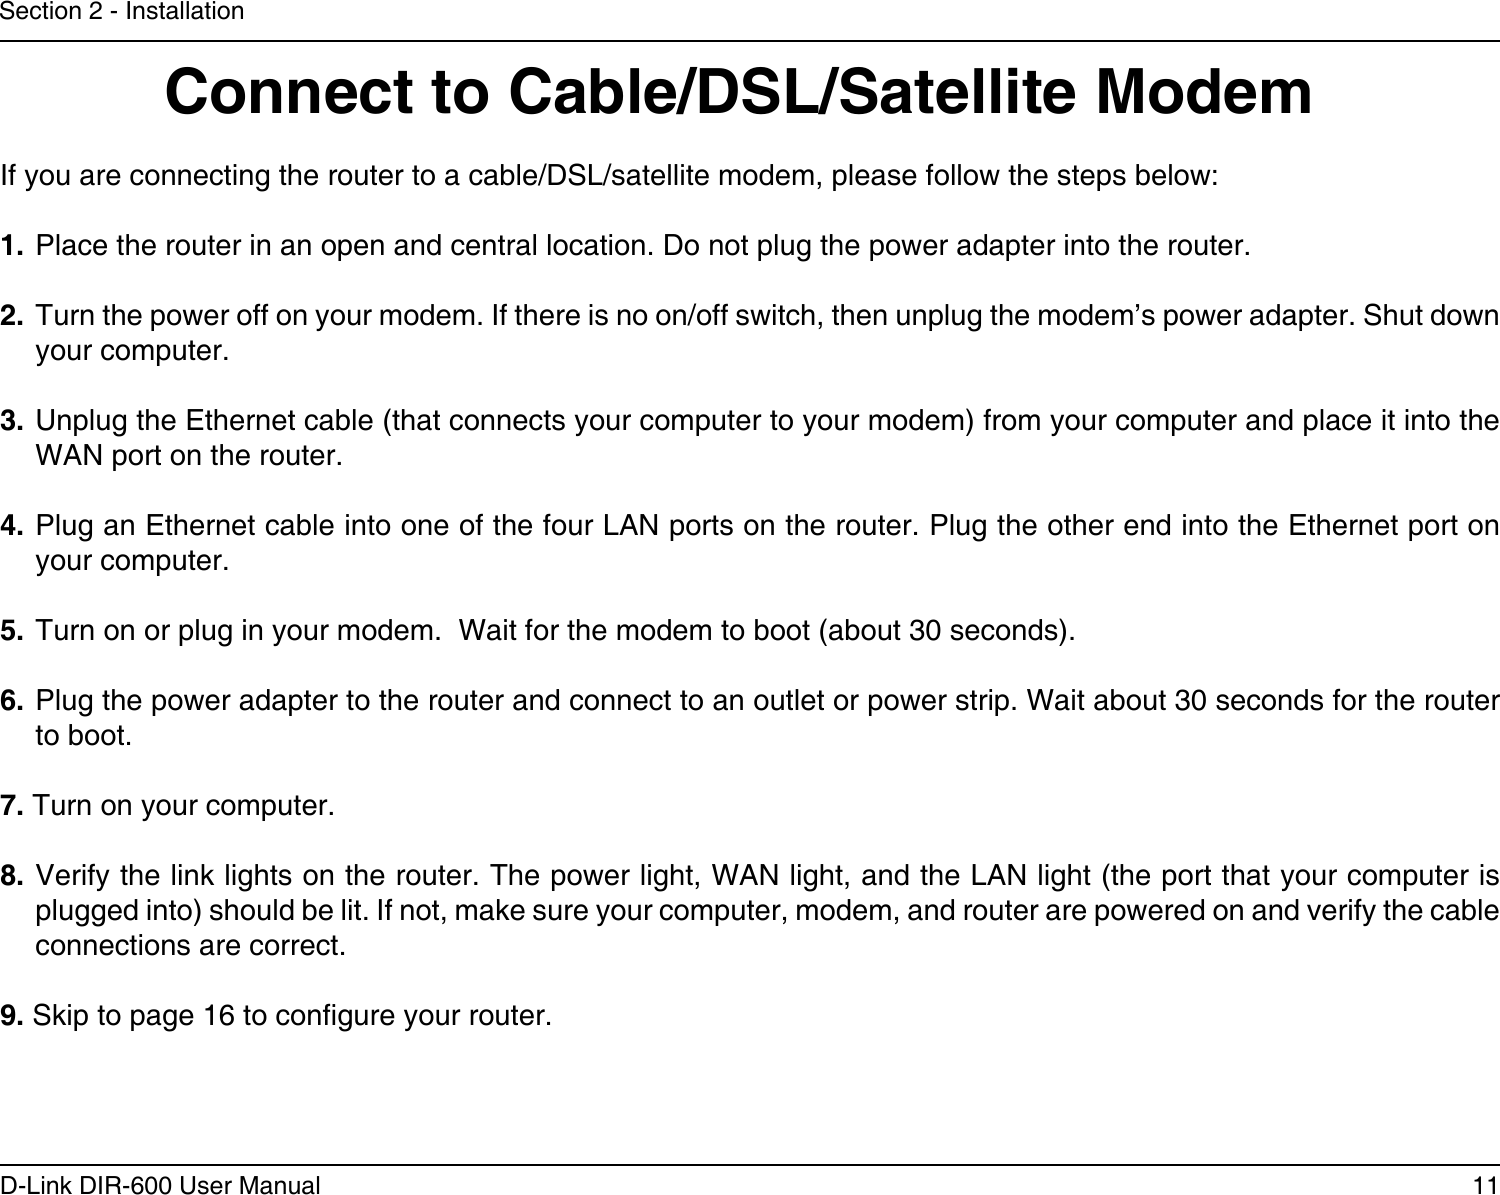 11D-Link DIR-600 User ManualSection 2 - InstallationIf you are connecting the router to a cable/DSL/satellite modem, please follow the steps below:1. Place the router in an open and central location. Do not plug the power adapter into the router. 2. Turn the power off on your modem. If there is no on/off switch, then unplug the modem’s power adapter. Shut down your computer.3. Unplug the Ethernet cable (that connects your computer to your modem) from your computer and place it into the WAN port on the router.  4. Plug an Ethernet cable into one of the four LAN ports on the router. Plug the other end into the Ethernet port on your computer.5. Turn on or plug in your modem.  Wait for the modem to boot (about 30 seconds). 6. Plug the power adapter to the router and connect to an outlet or power strip. Wait about 30 seconds for the router to boot. 7. Turn on your computer. 8. Verify the link lights on the router. The power light, WAN light, and the LAN light (the port that your computer is plugged into) should be lit. If not, make sure your computer, modem, and router are powered on and verify the cable connections are correct. 9. Skip to page 16 to congure your router. Connect to Cable/DSL/Satellite Modem